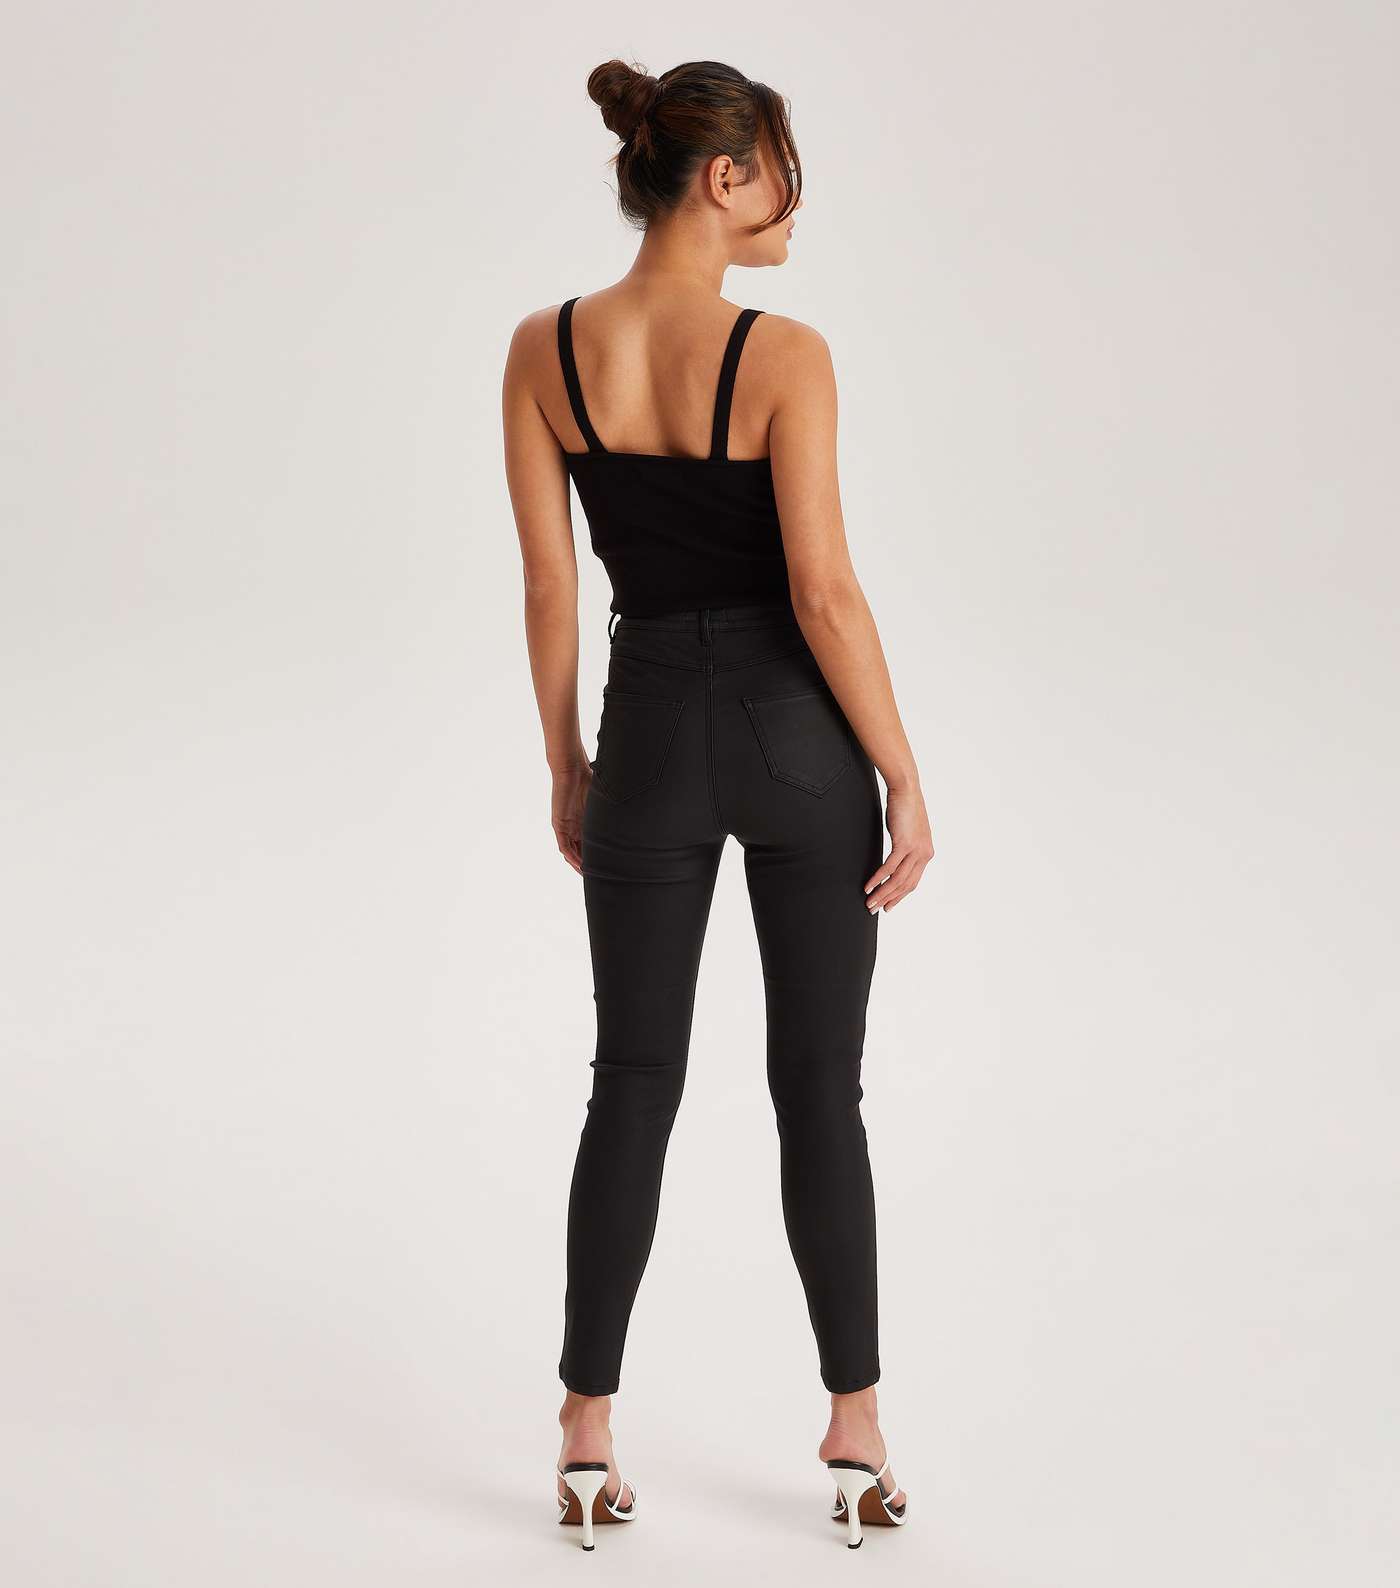 Urban Bliss Black Coated Leather-Look Super Skinny Jeans Image 4